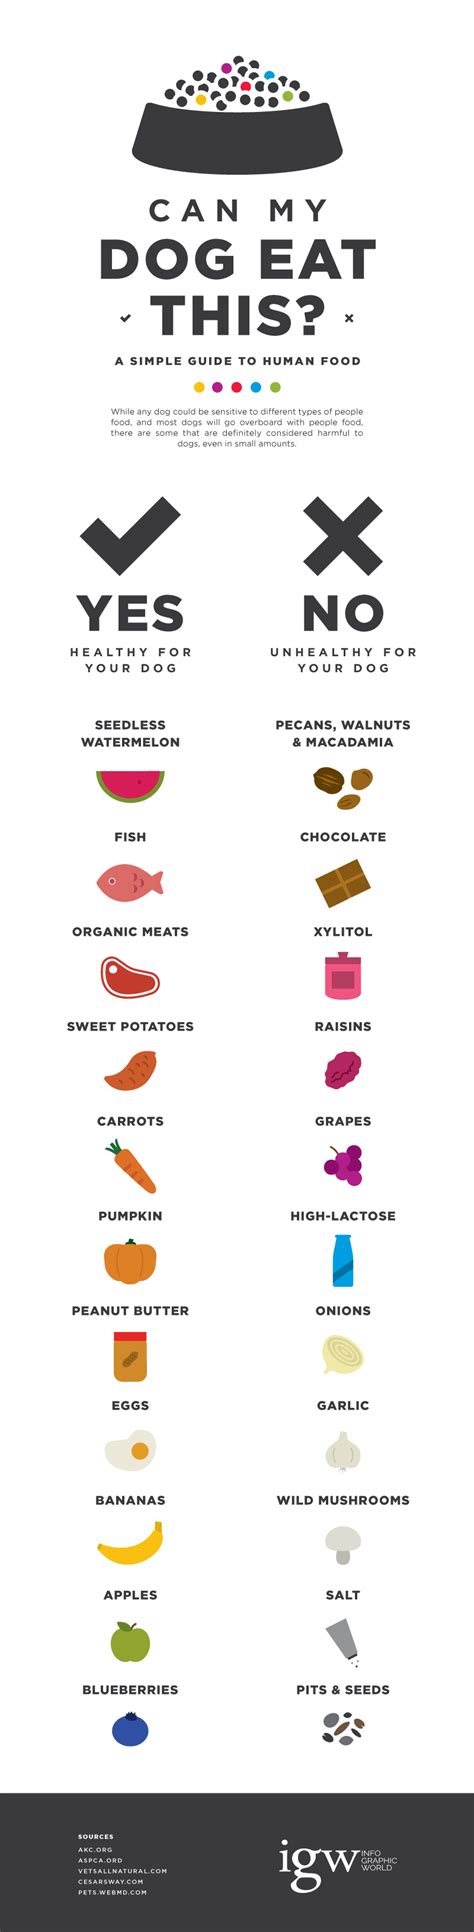 What can cause human food? Guide to What Dogs Can and Cannot Eat - Infographic